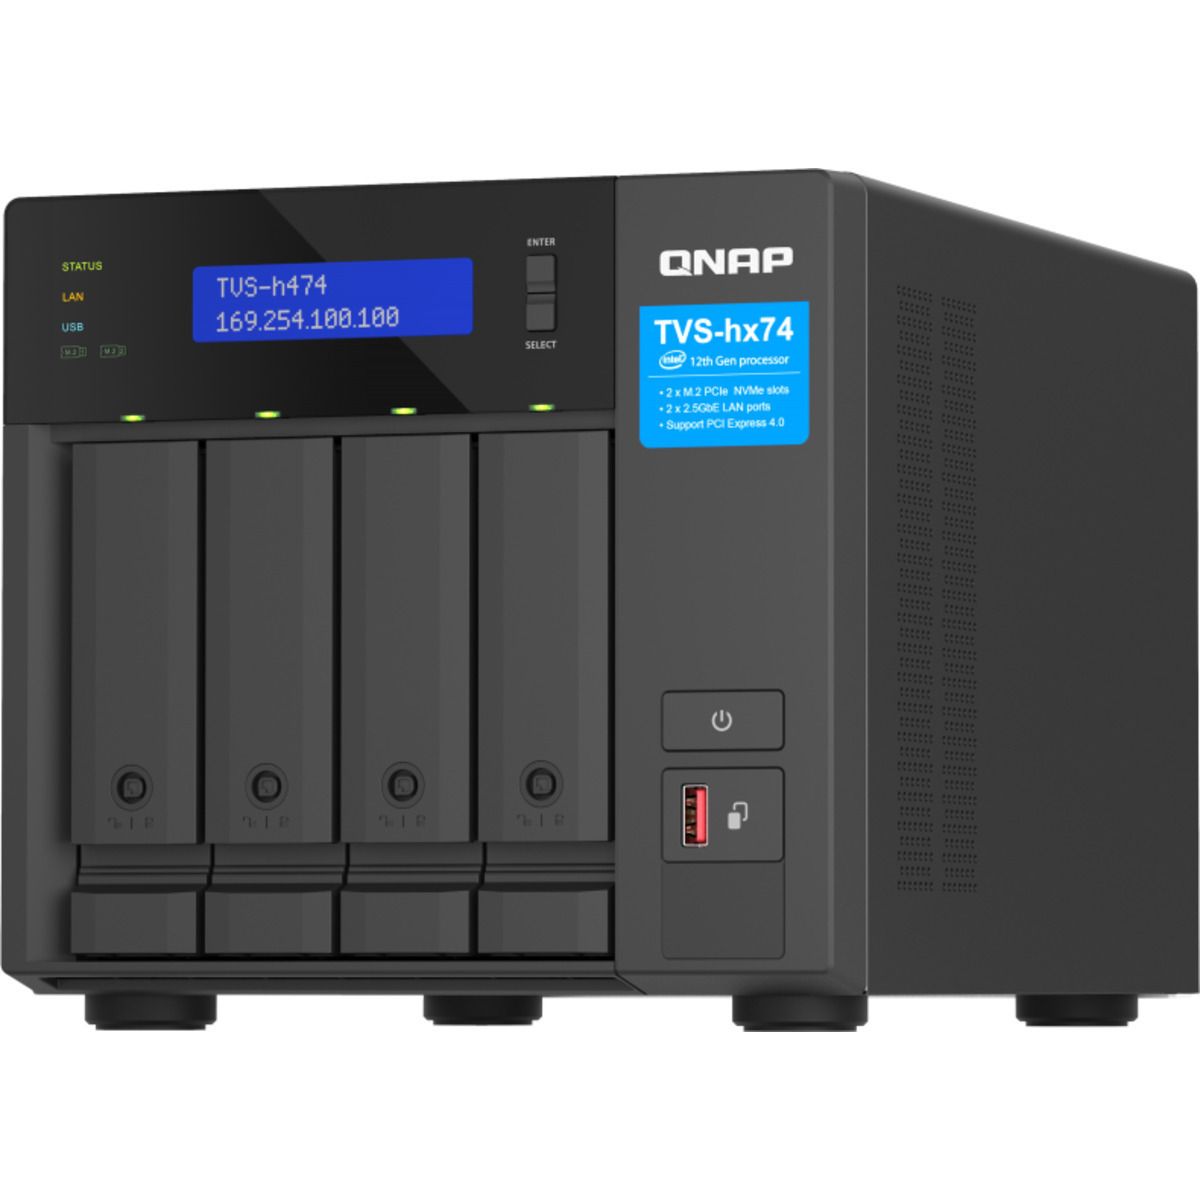 QNAP TVS-h474 Pentium Gold 40tb 4-Bay Desktop Multimedia / Power User / Business NAS - Network Attached Storage Device 4x10tb Western Digital Red Plus WD101EFBX 3.5 7200rpm SATA 6Gb/s HDD NAS Class Drives Installed - Burn-In Tested - FREE RAM UPGRADE TVS-h474 Pentium Gold